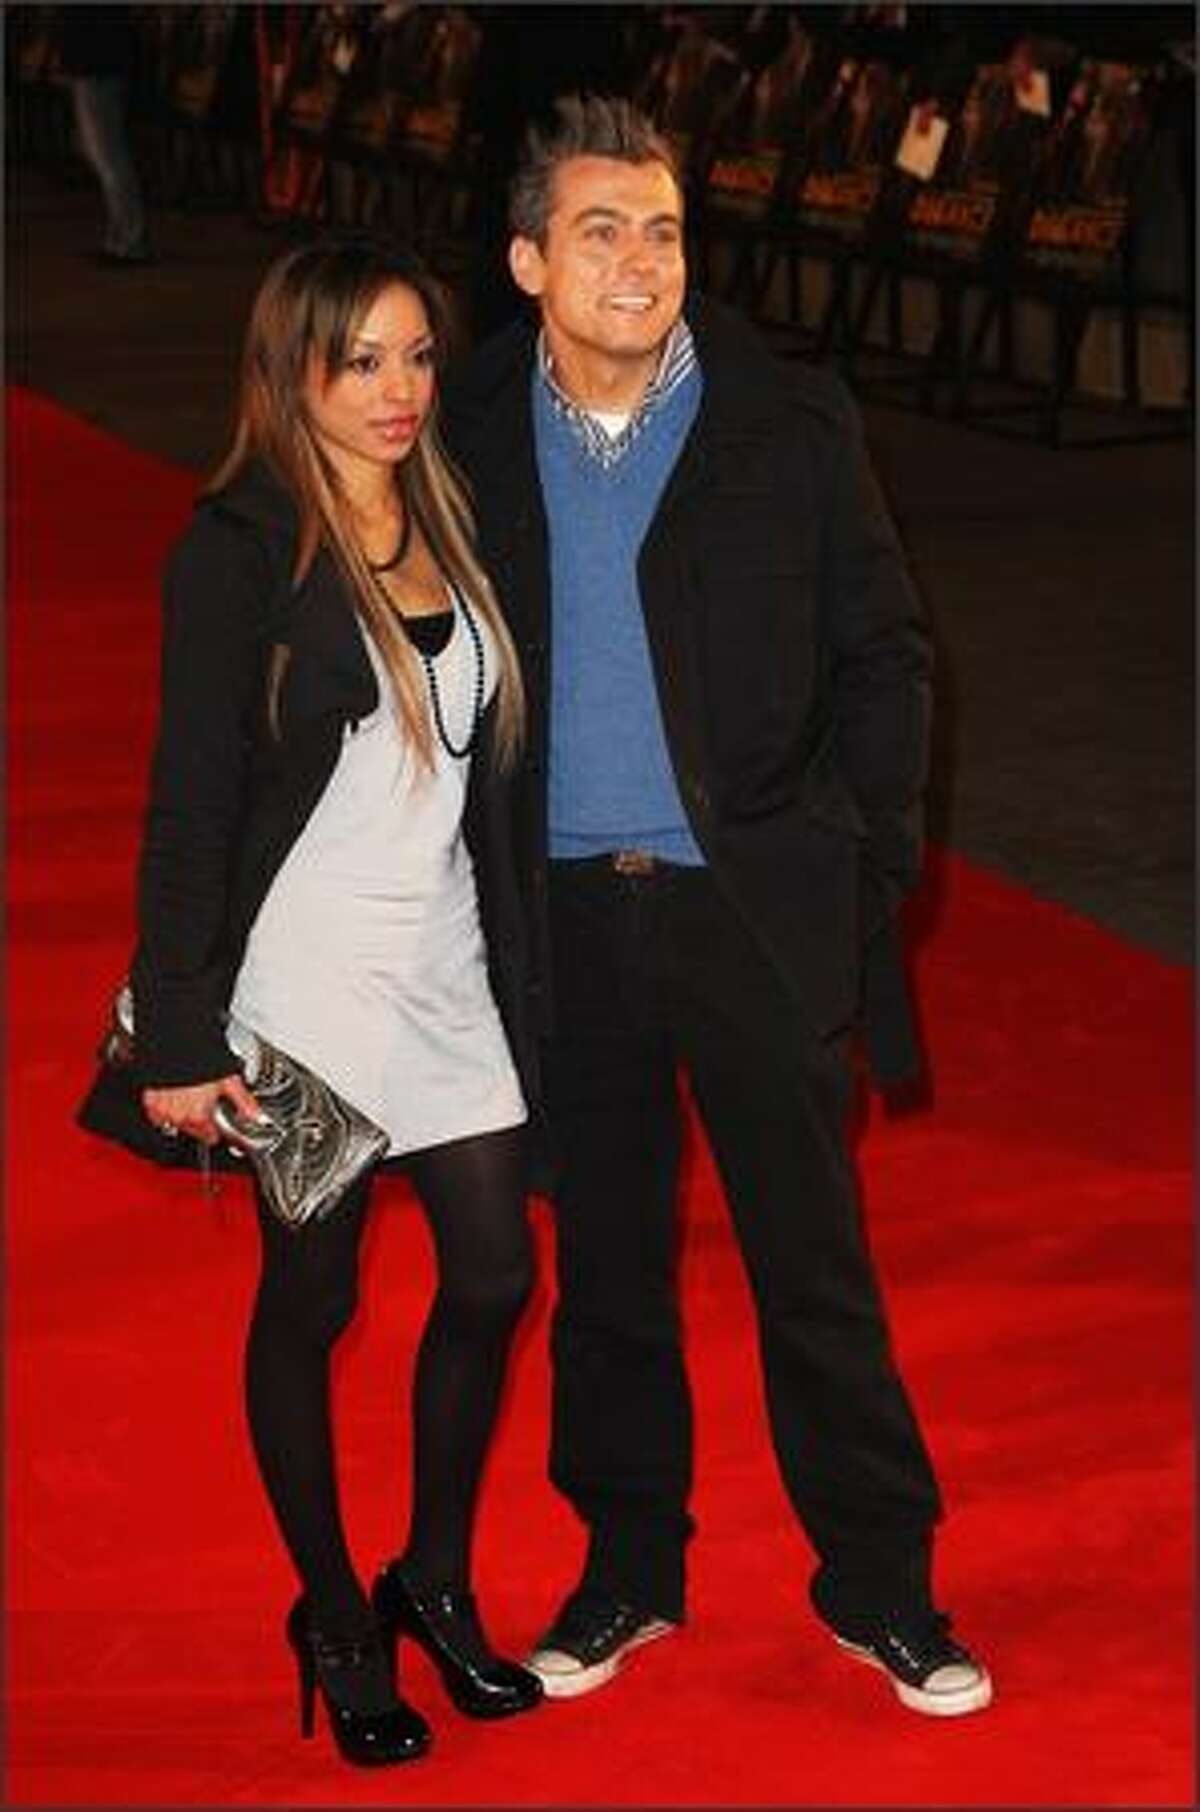 Paul Dana and guest arrive at the European Premiere of 'Defiance' at the Odeon West End cinema, Leicester Square on Tuesday in London, England.